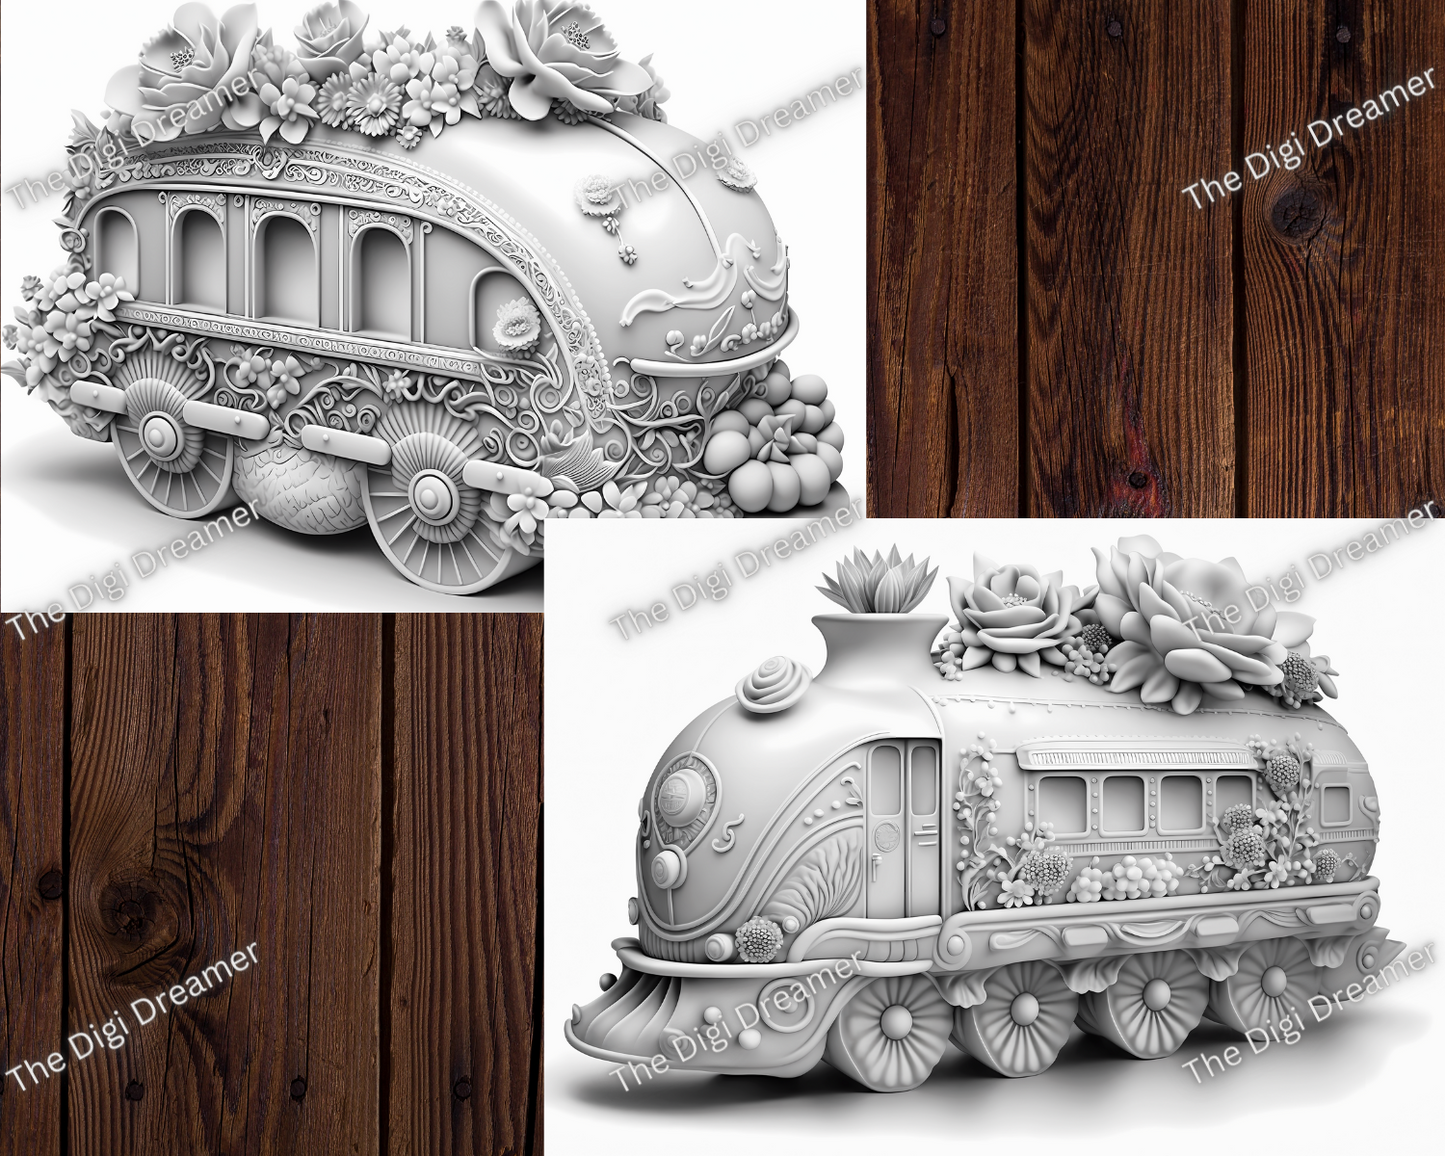 Fantasy Trains Grayscale Coloring Pages